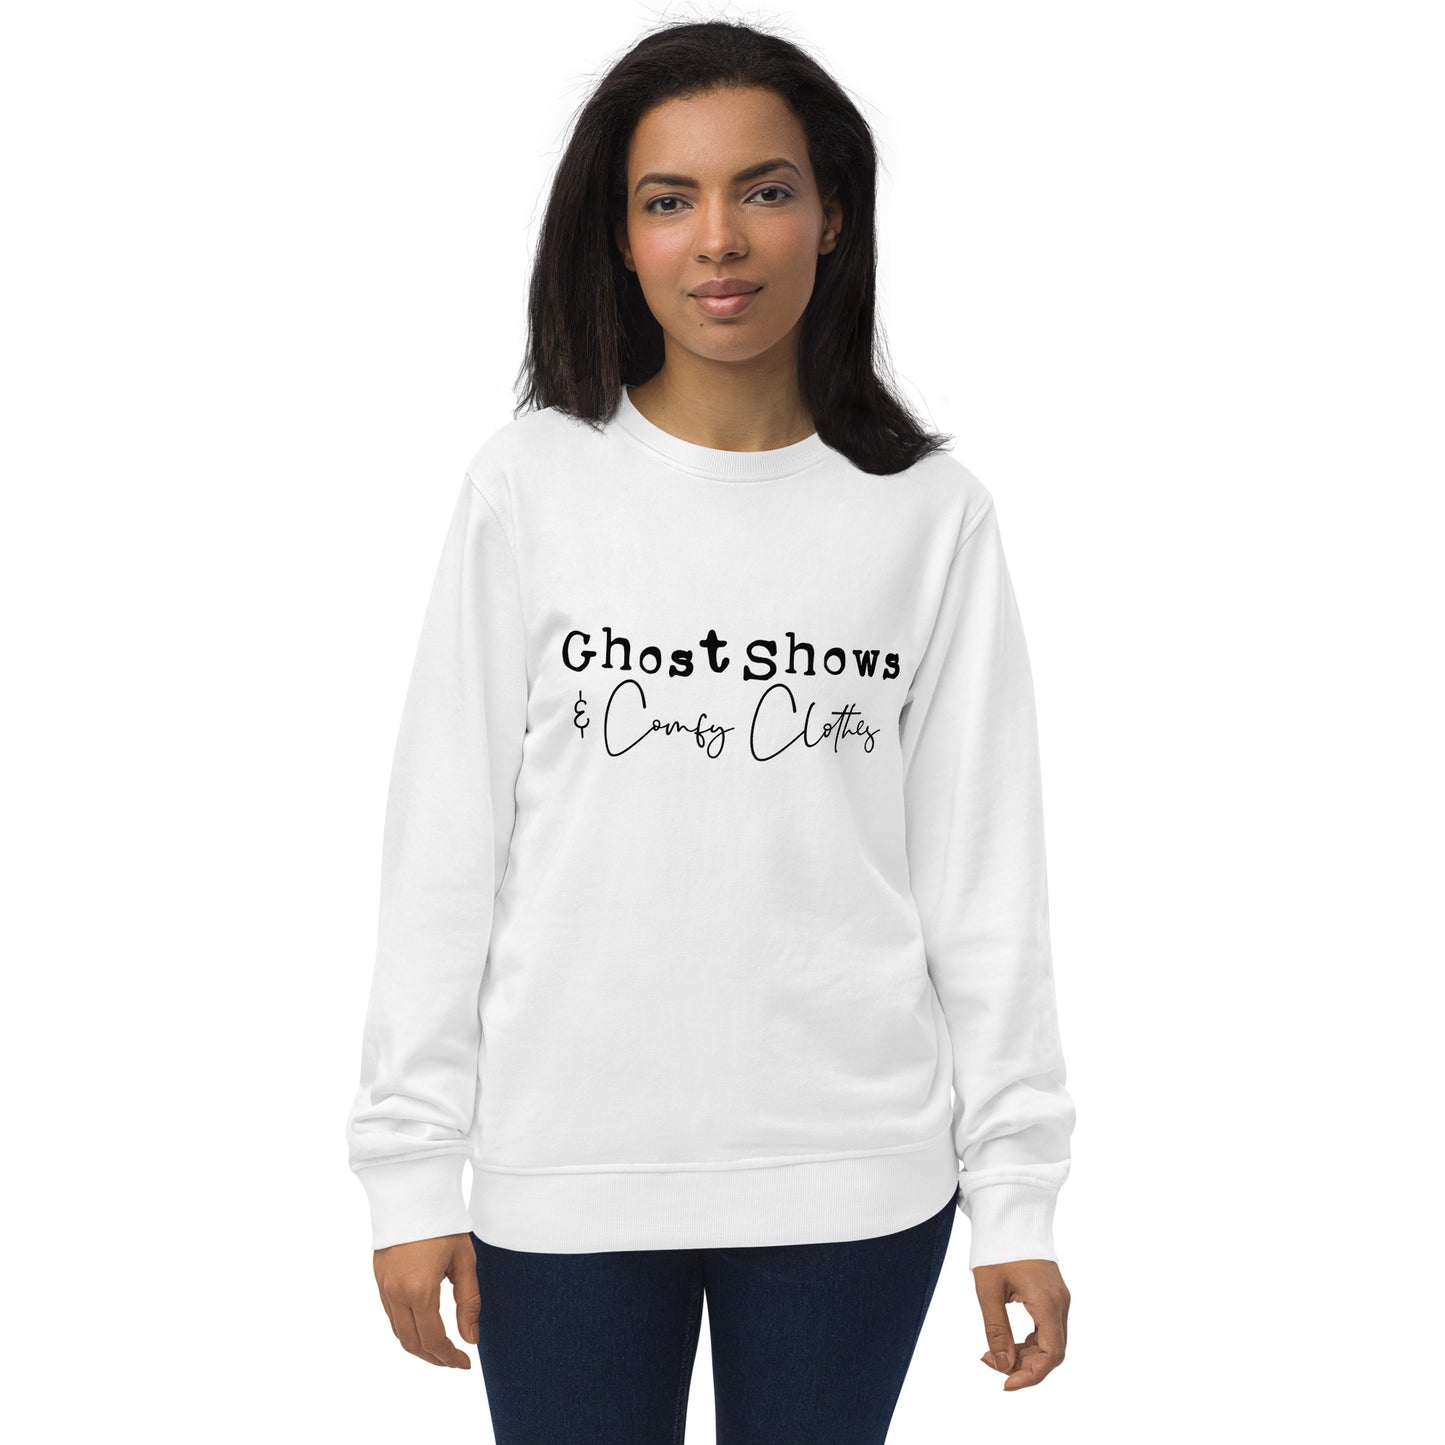 "Ghost Shows & Comfy Clothes" / Unisex organic sweatshirt